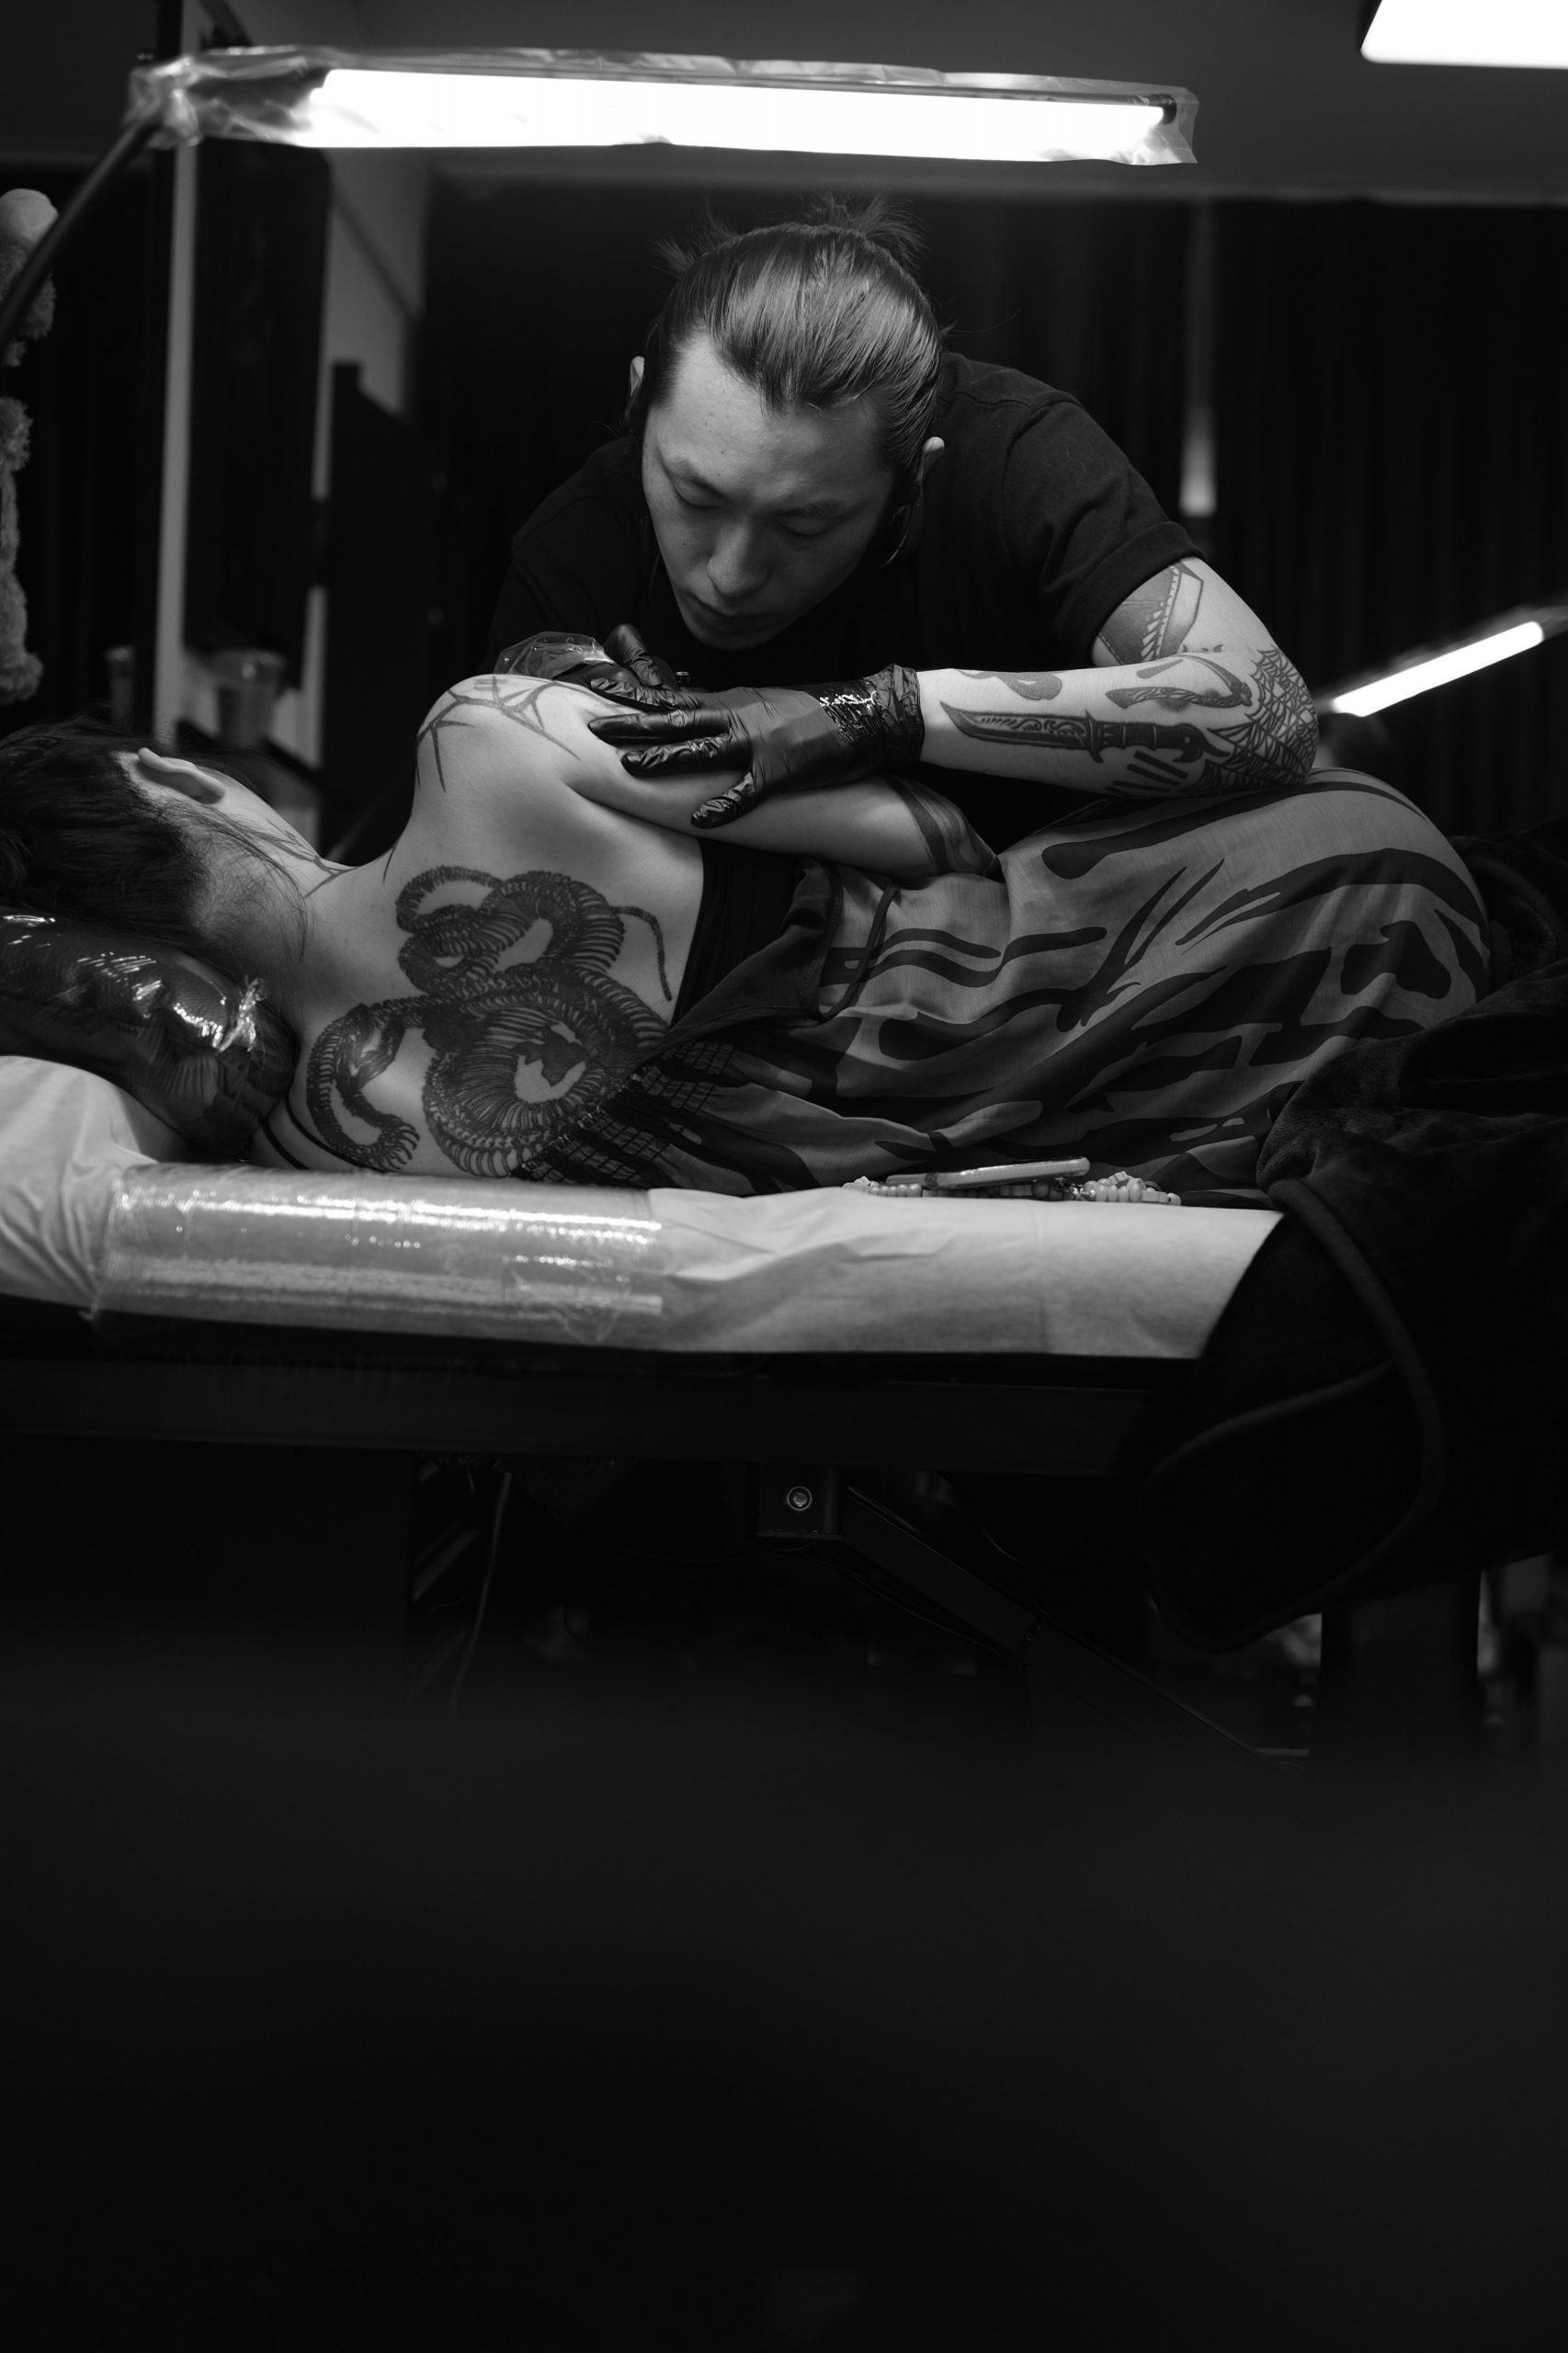 How To Become A Tattooist | The UK Careers Fair